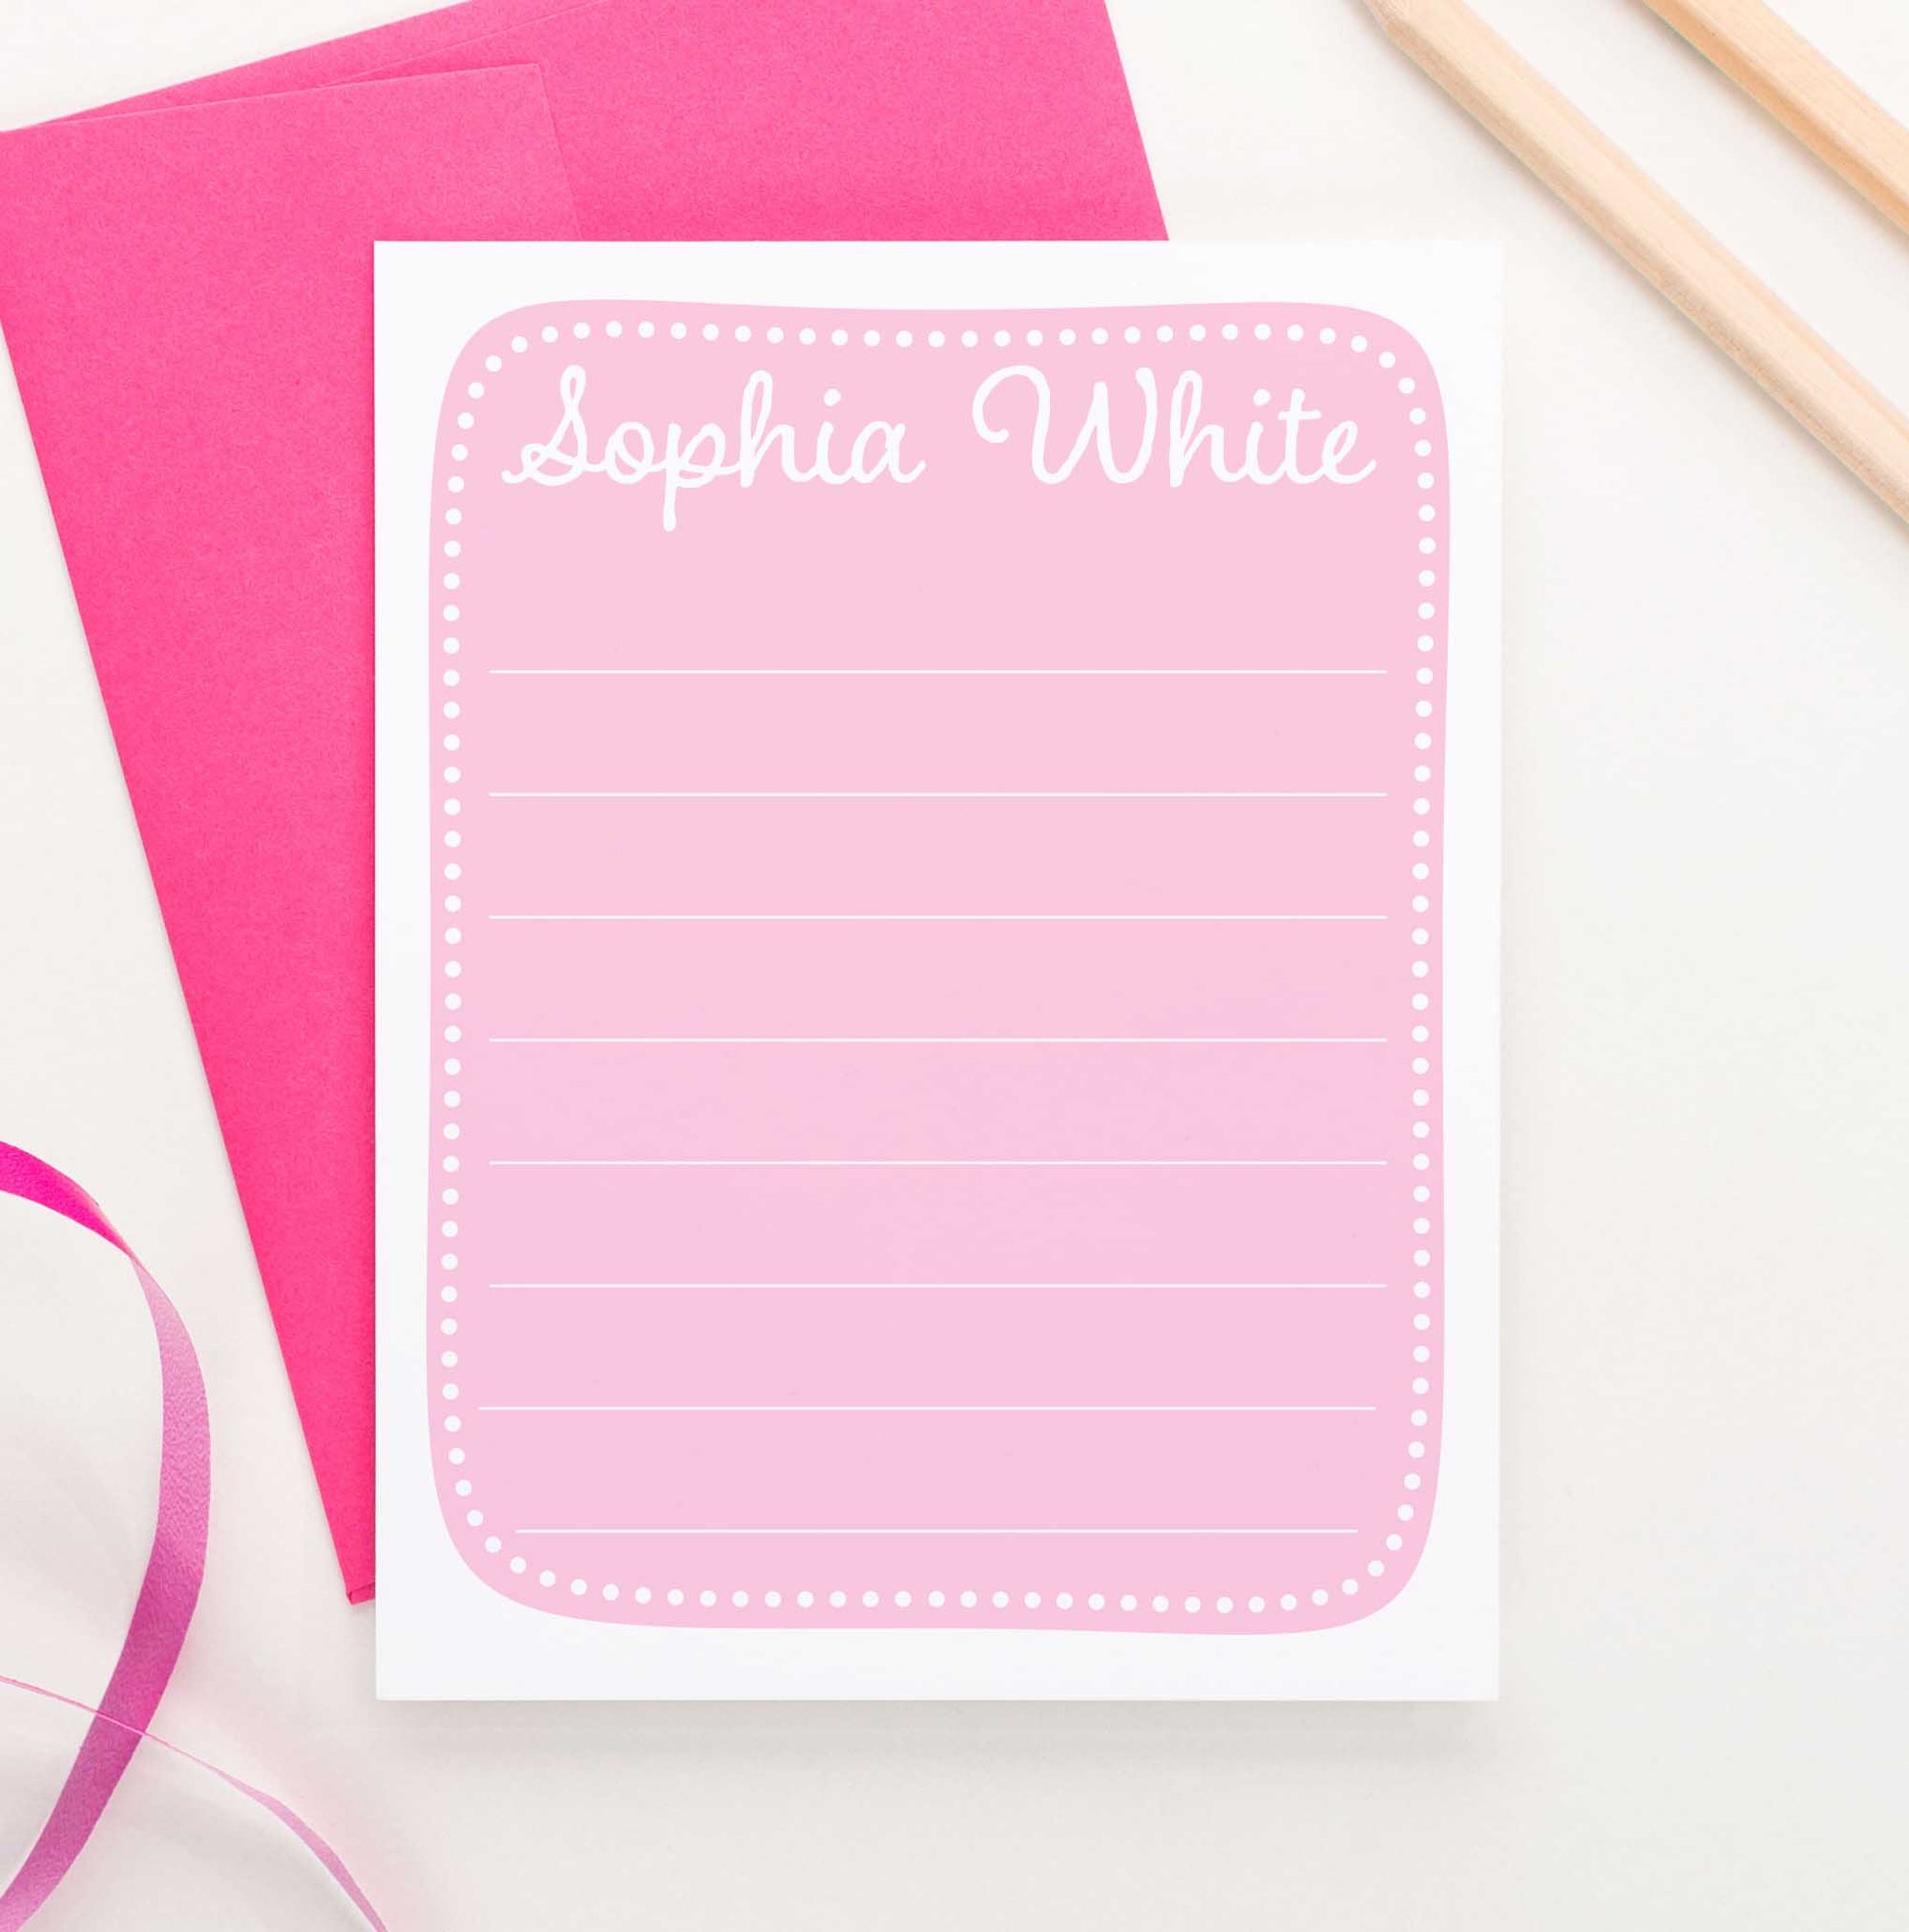 KS158 personalized girls pink stationery with polka dot border baby pink kids cute lined